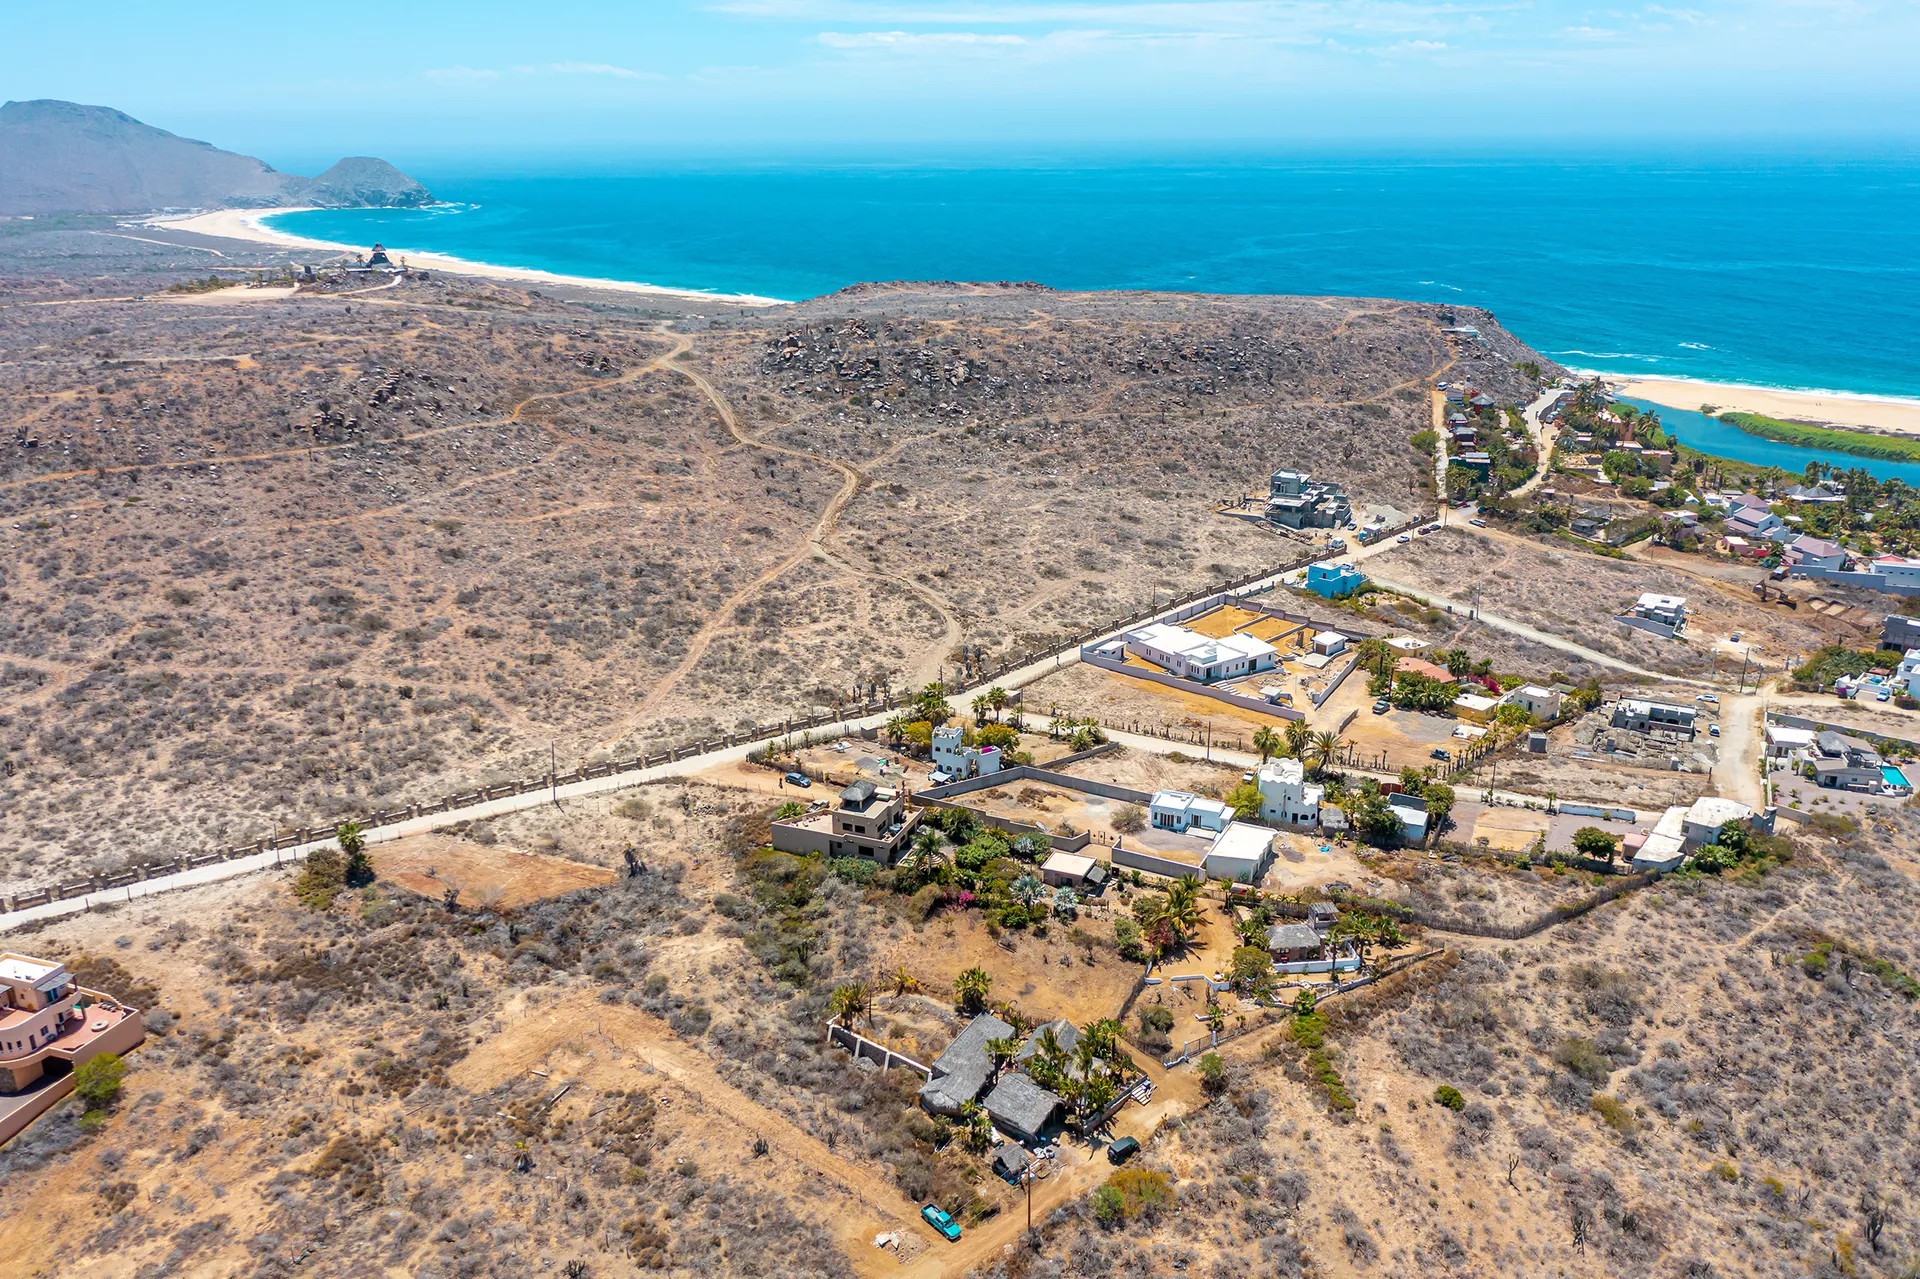 Travel an hour from the Los Cabos and La Paz municipal airports to discover the charming town of Todos Santos.